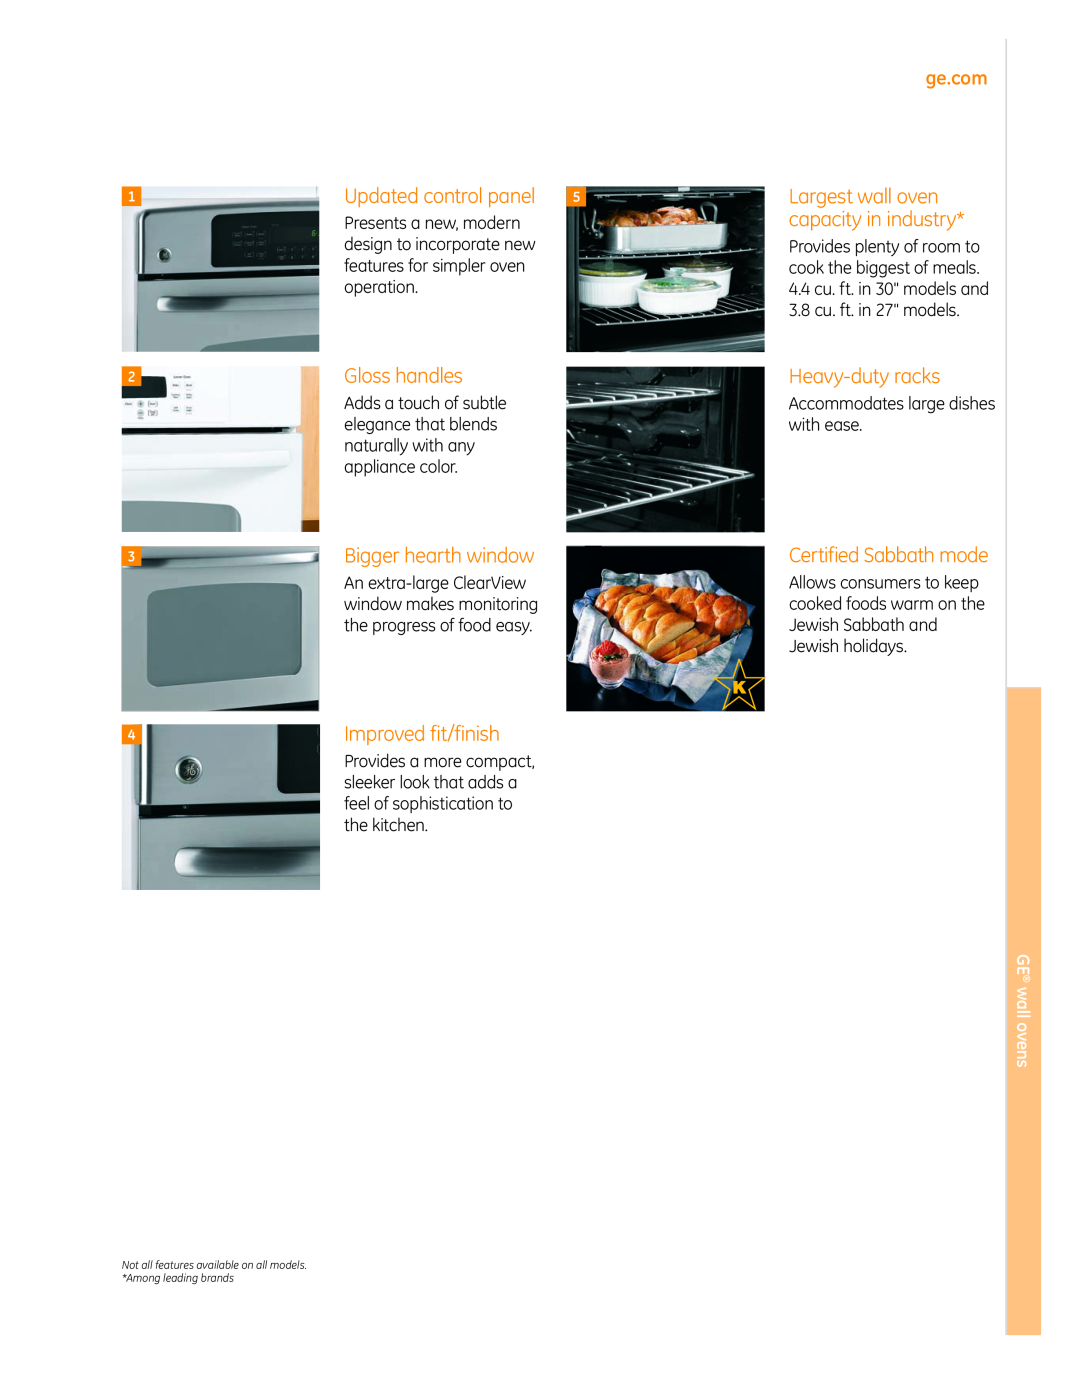 GE PT920 Gloss handles, Bigger hearth window, Improved fit/finish, Heavy-dutyracks, GE wall ovens, Updated control panel 